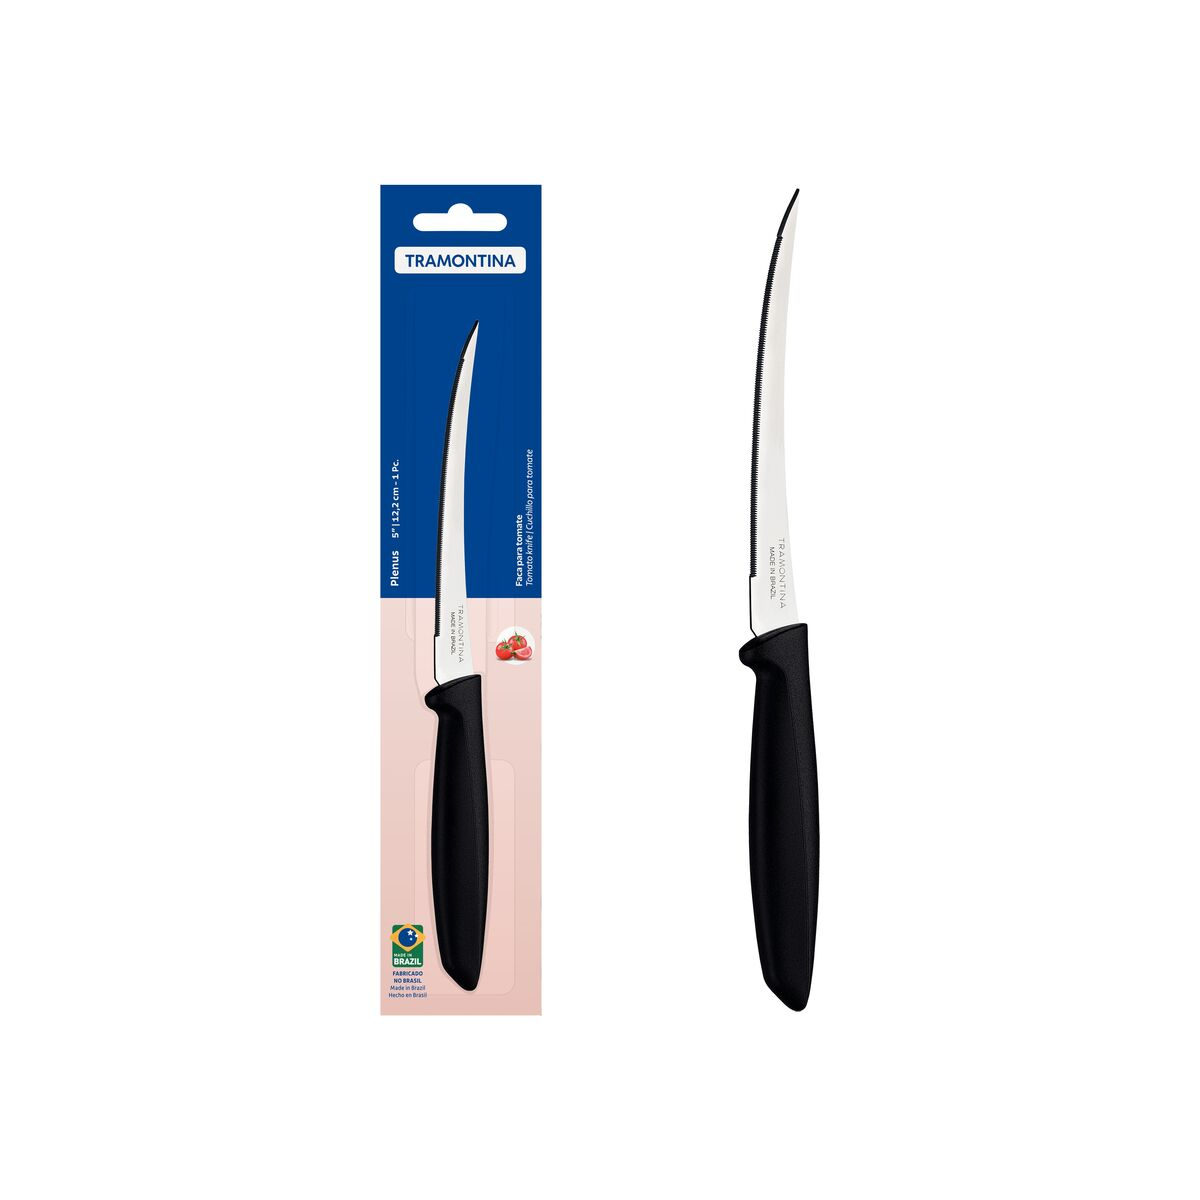 Tramontina Plenus Tomato Knife with Stainless-Steel Blade and Black Polypropylene Handle 5"